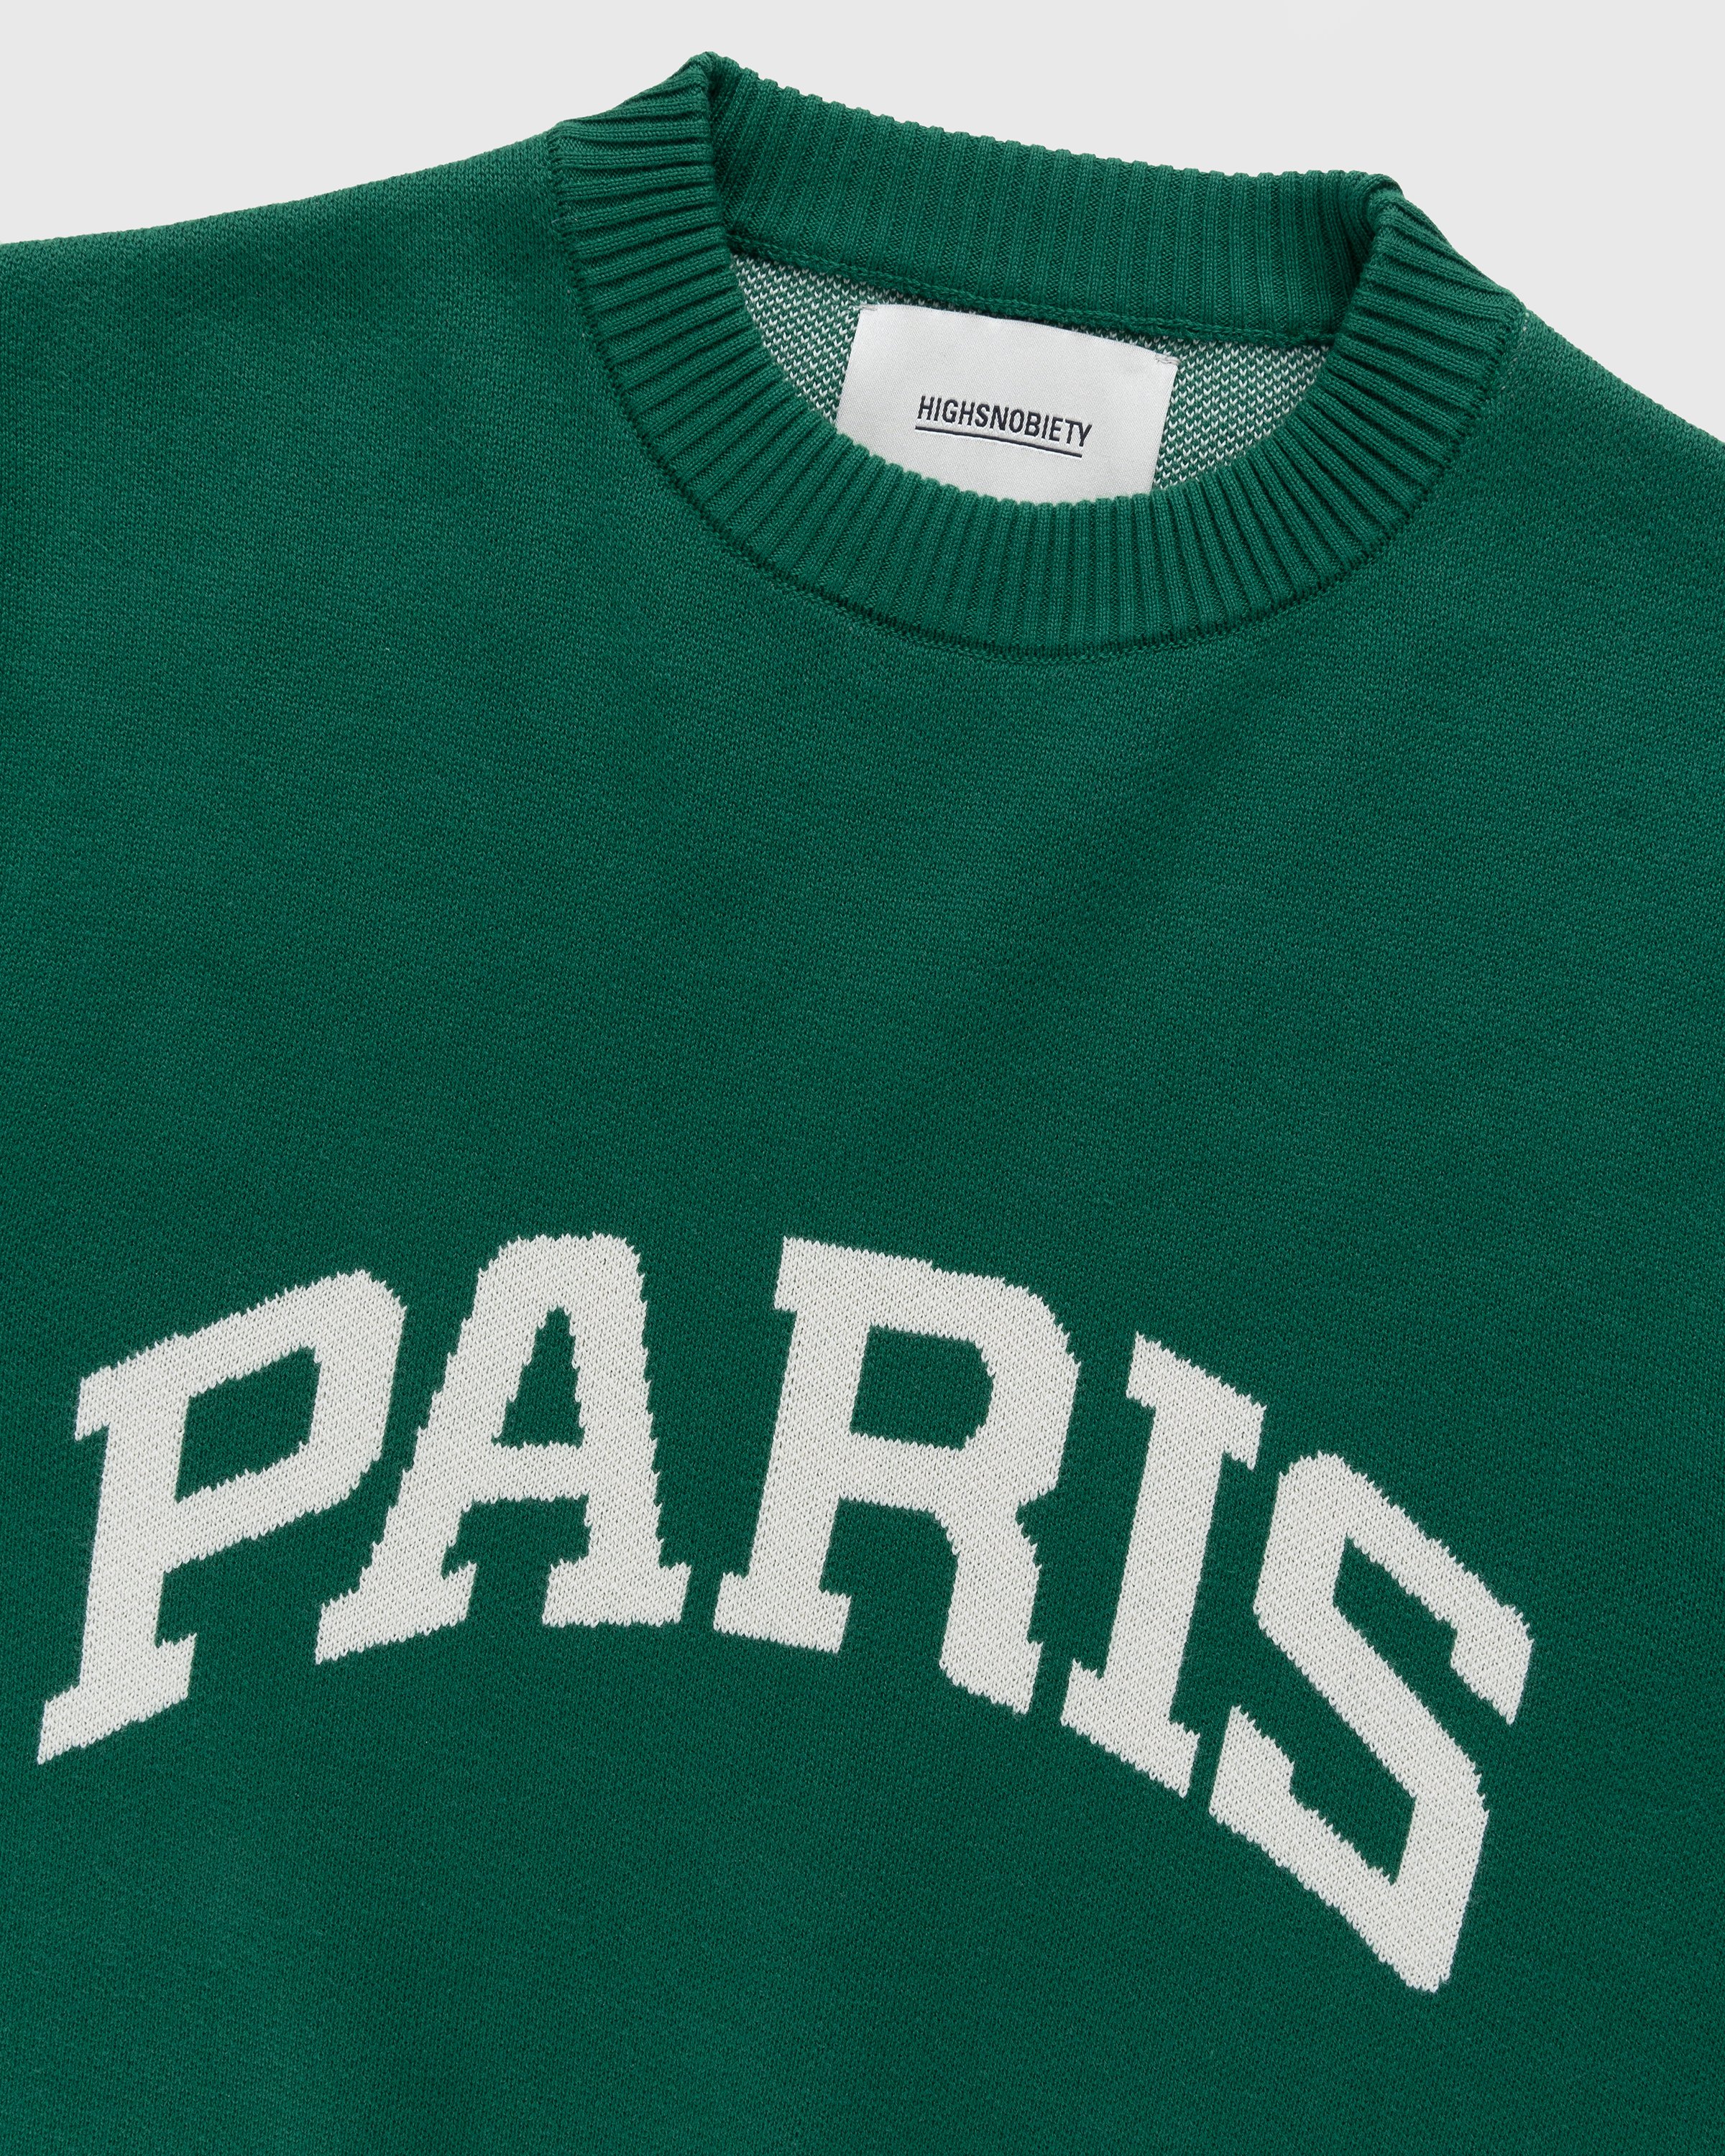 Highsnobiety - Not In Paris 4 Knitted Crewneck Sweater Green - Clothing - Green - Image 4